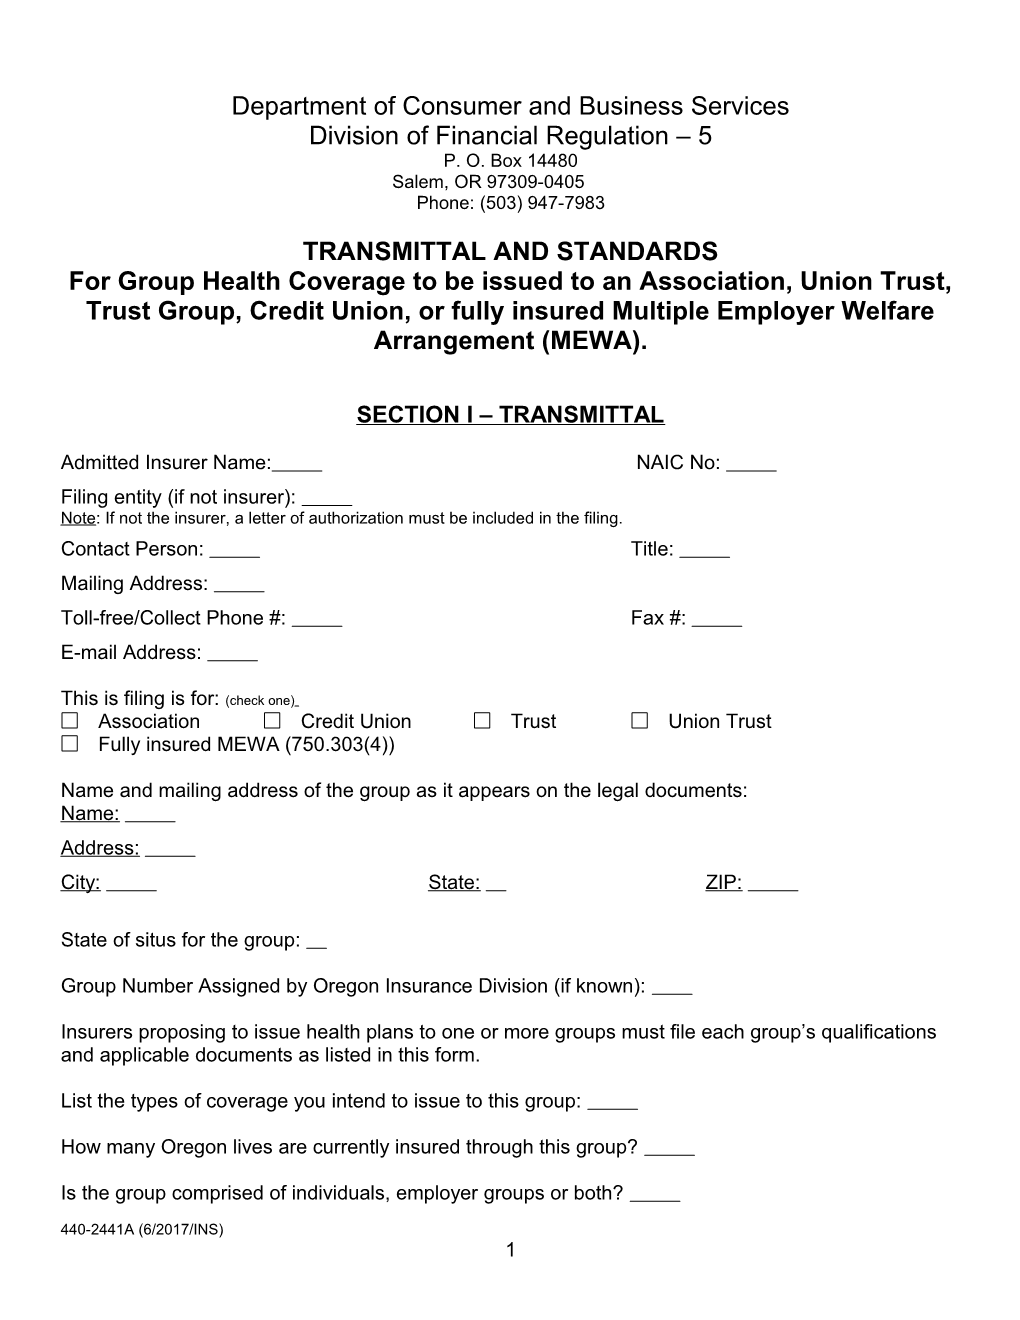 Form 2441A, Transmittal and Standards for Group Health Coverage to Be Issued to an Association